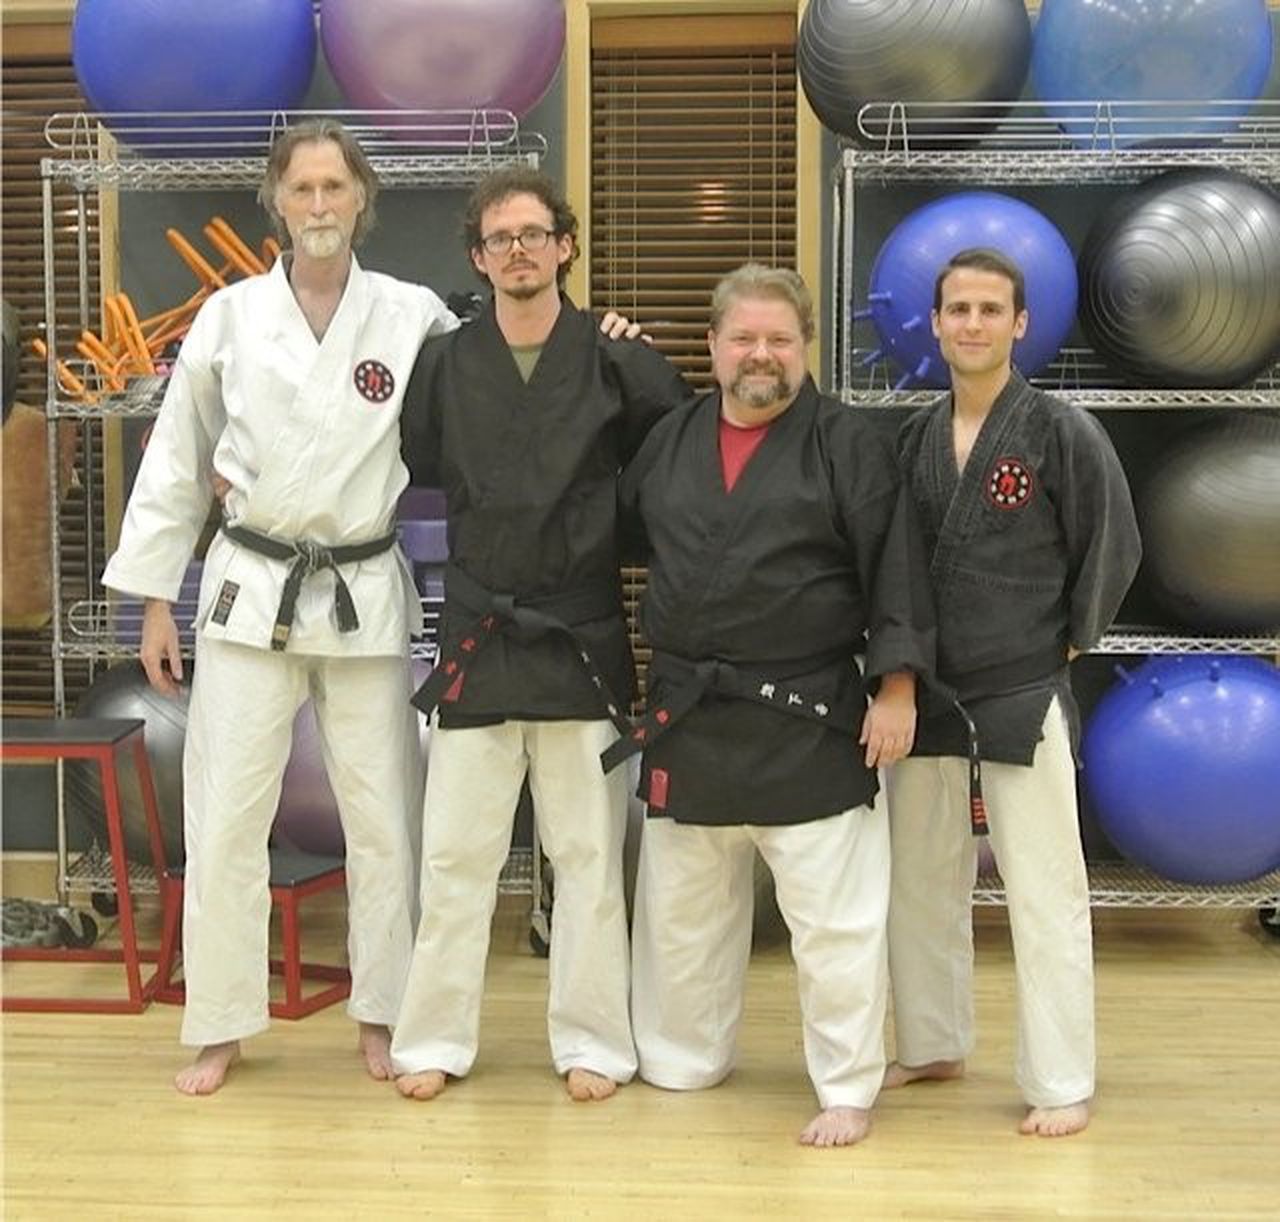 Madison Area YMCA’s Karate Program offers instructors with decades of